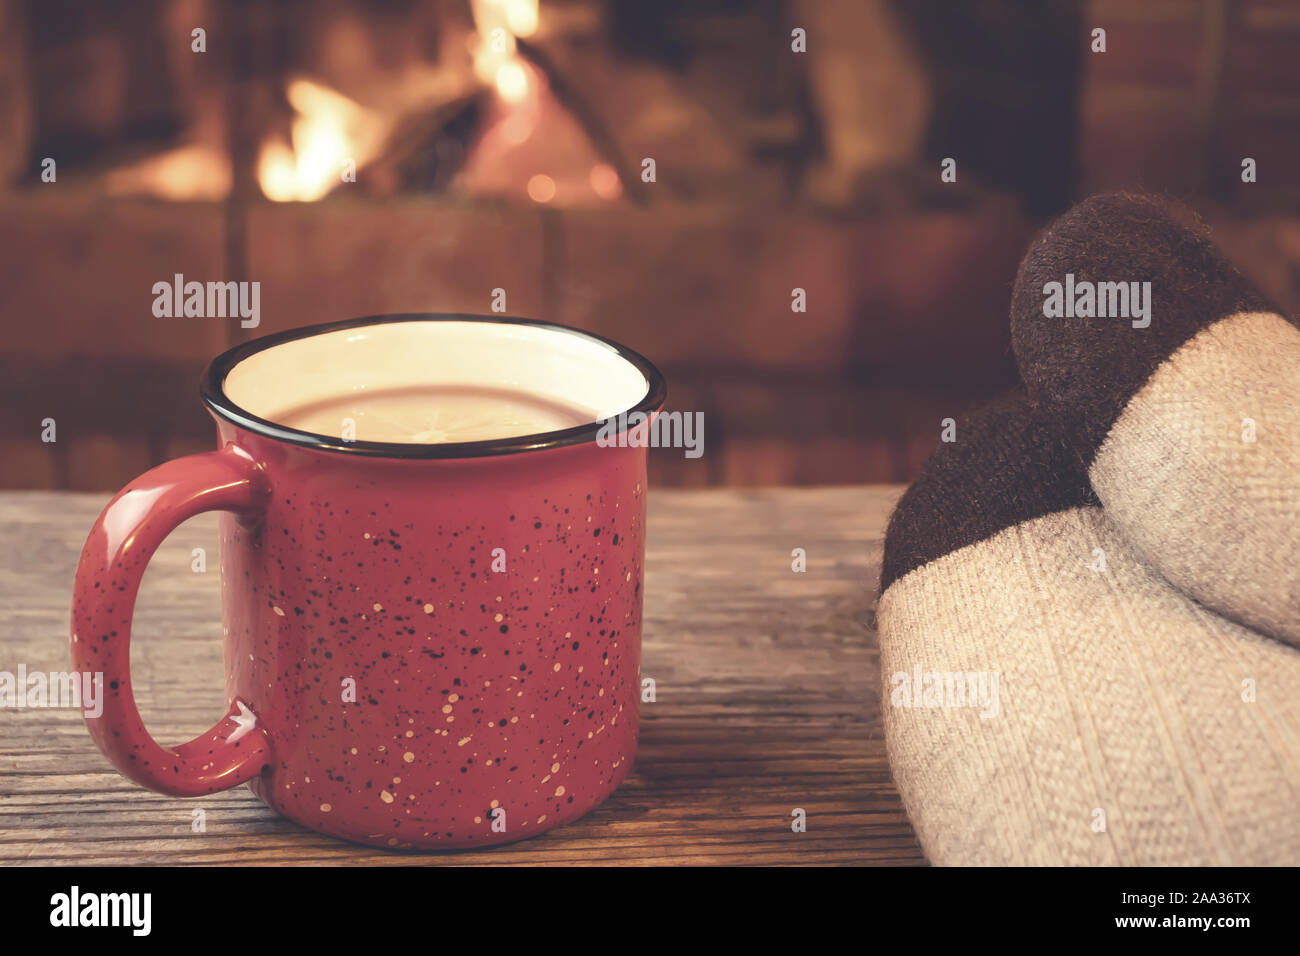 Feet in woolen socks, a red mug with hot tea opposite the burning fireplace, comfort, and warmth of the hearth concept. Stock Photo